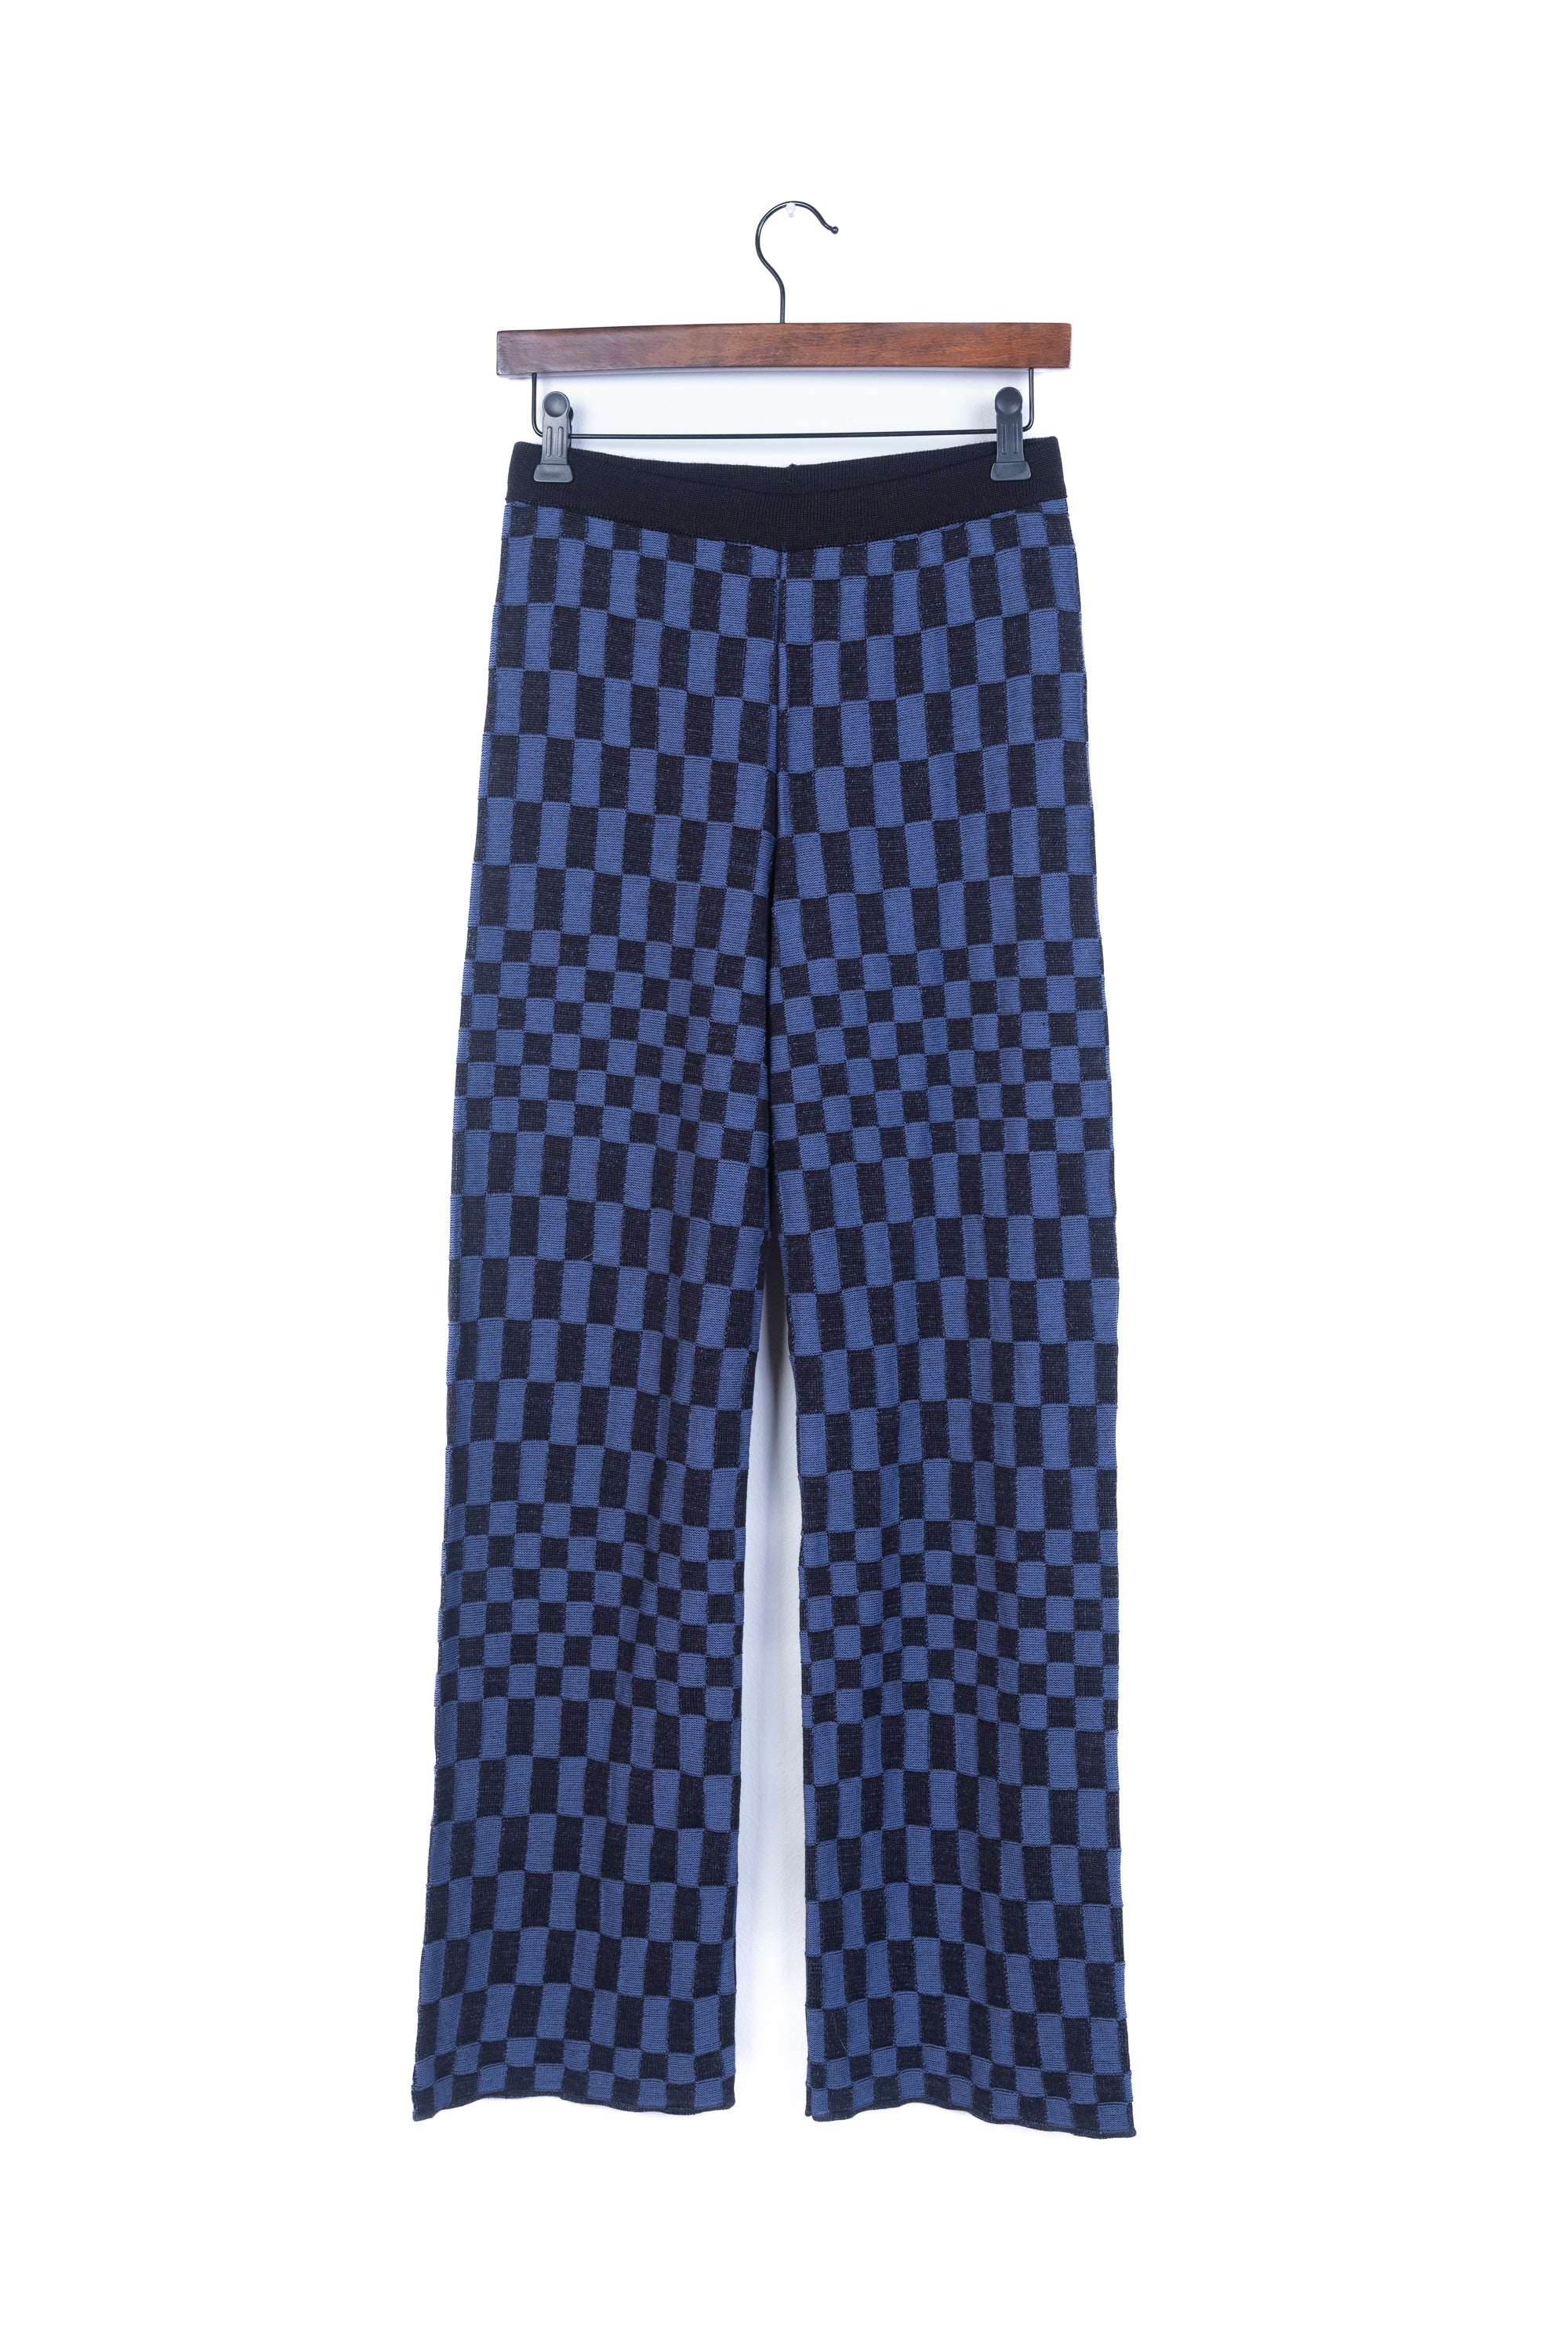 Black and Blue Checkered Pants